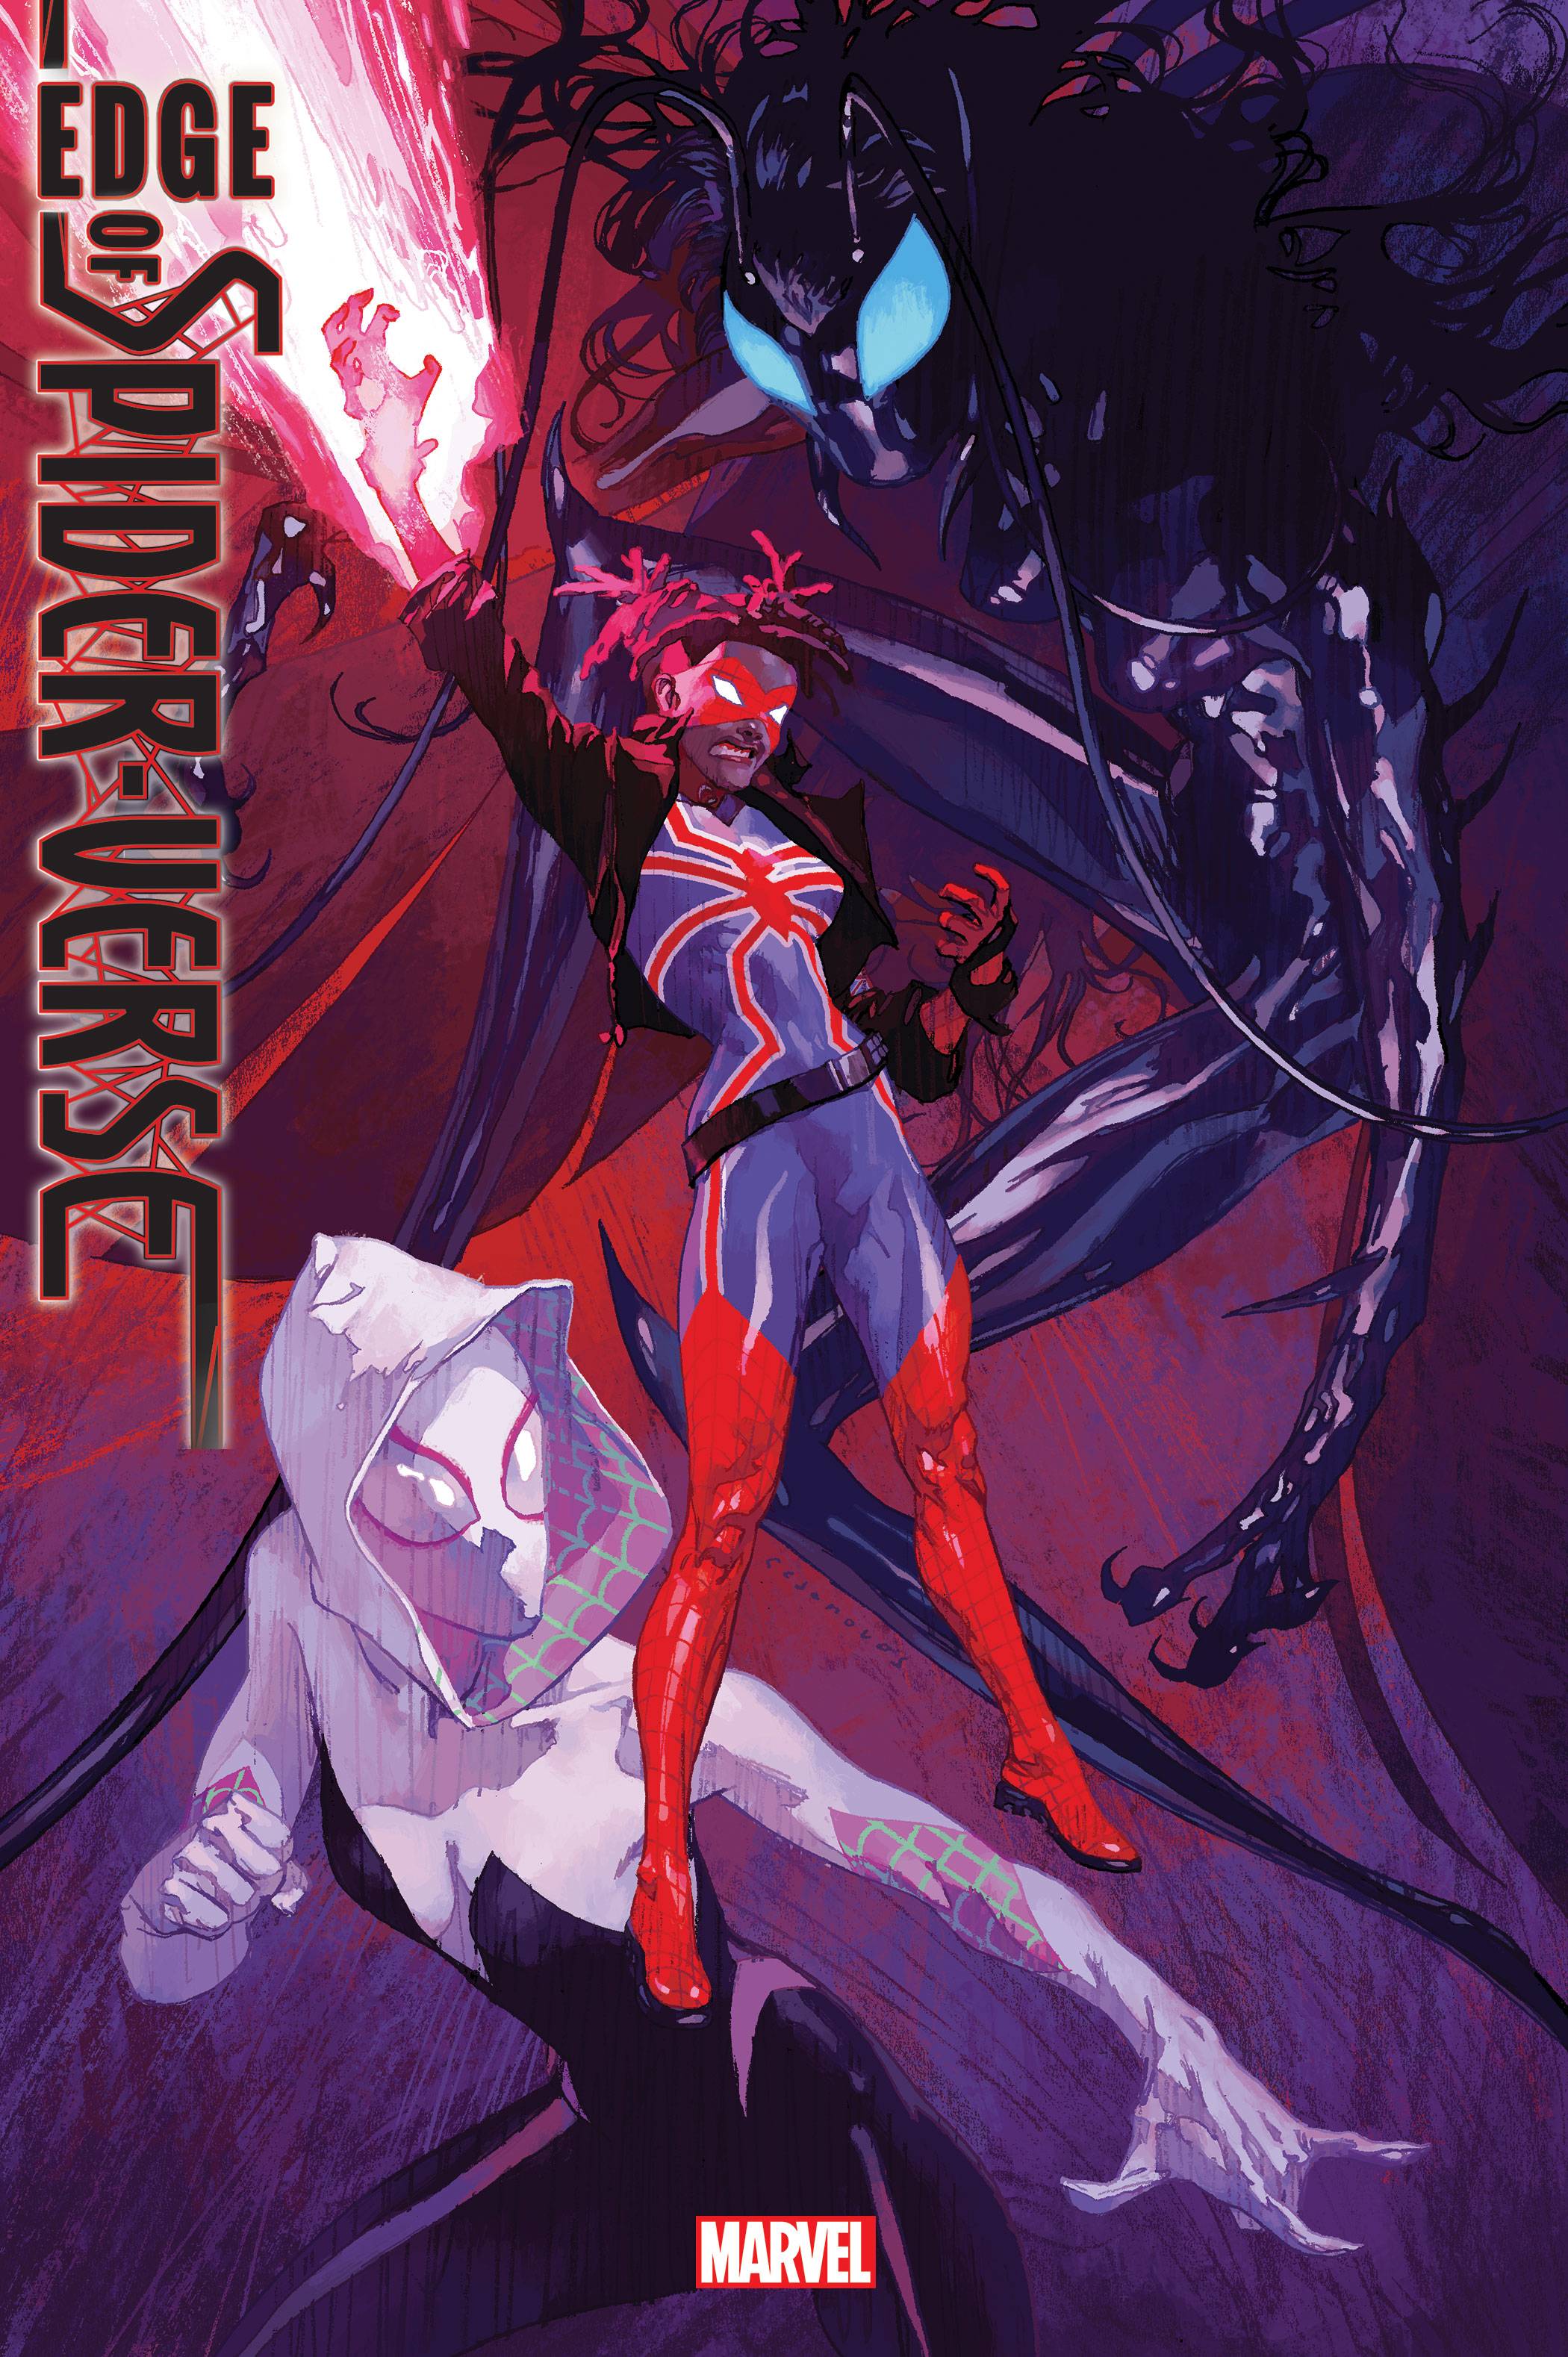 Edge Of Spider-Verse #2 (Of 5) - State of Comics